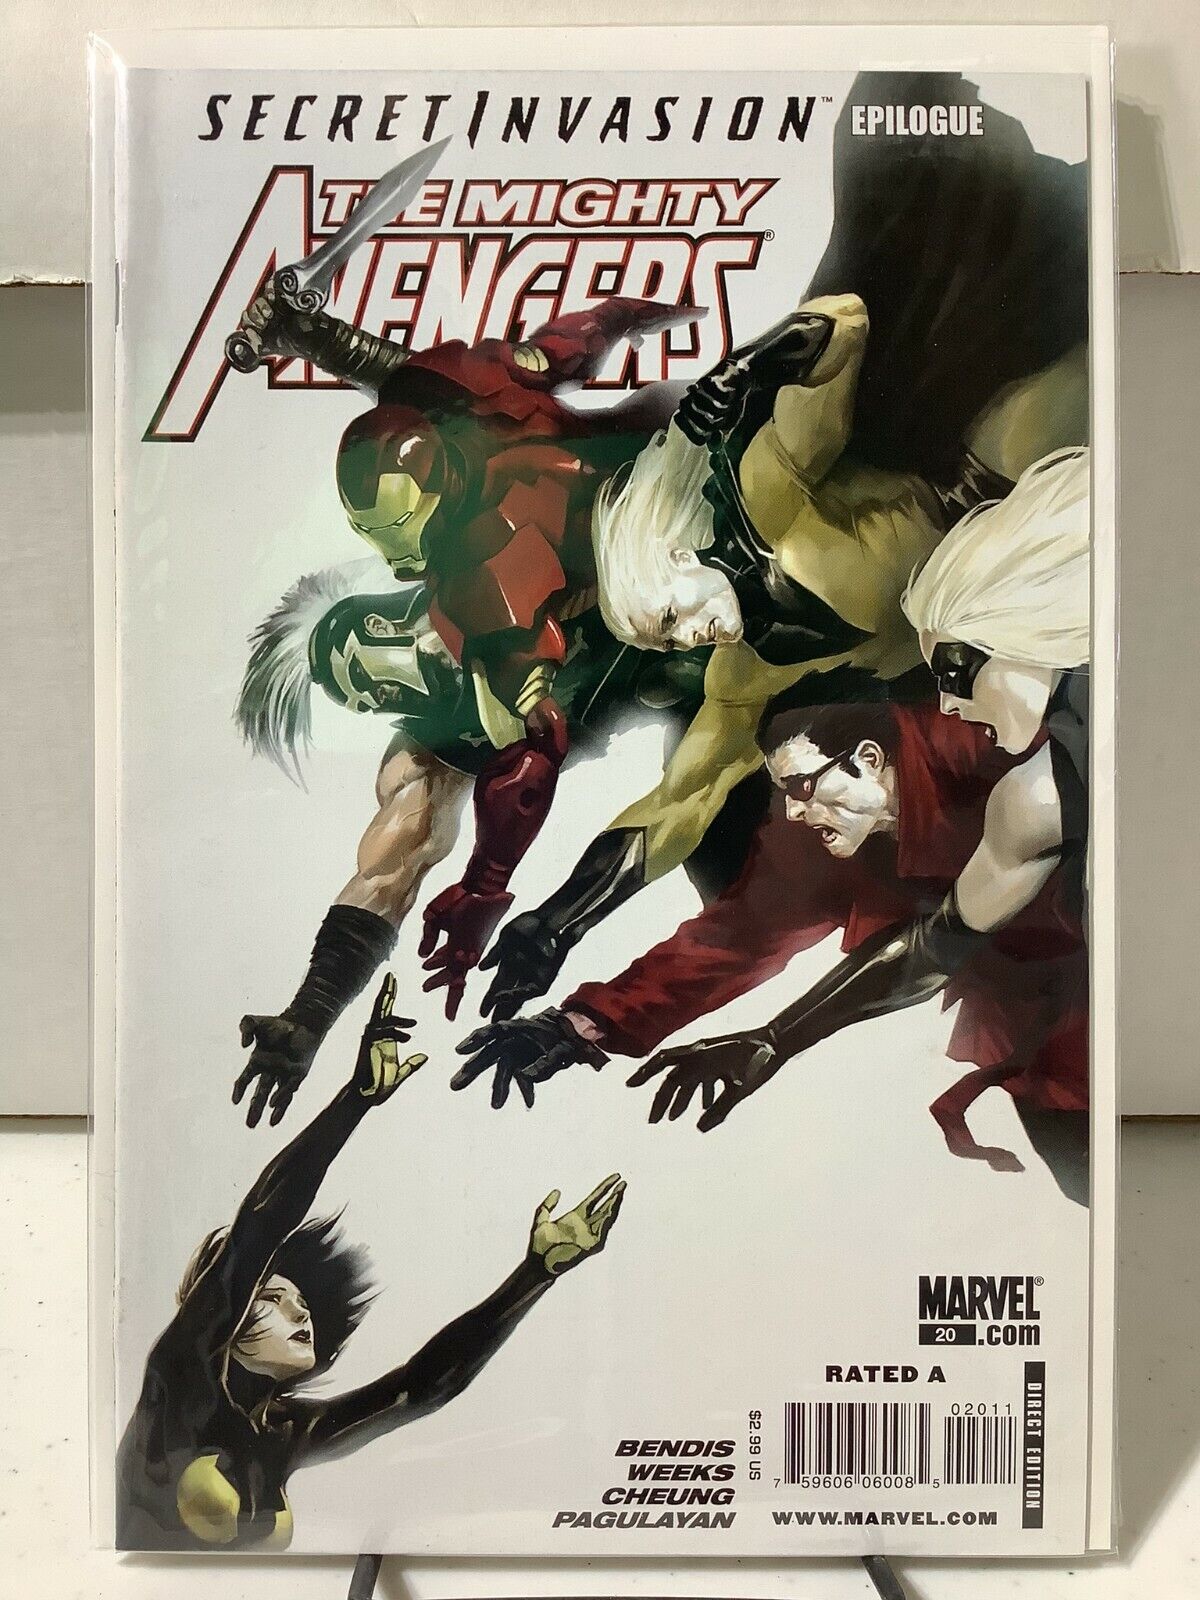 Mighty Avengers Vol 1 #20 - #31 - Unread Unopened - Combined Shipping Available